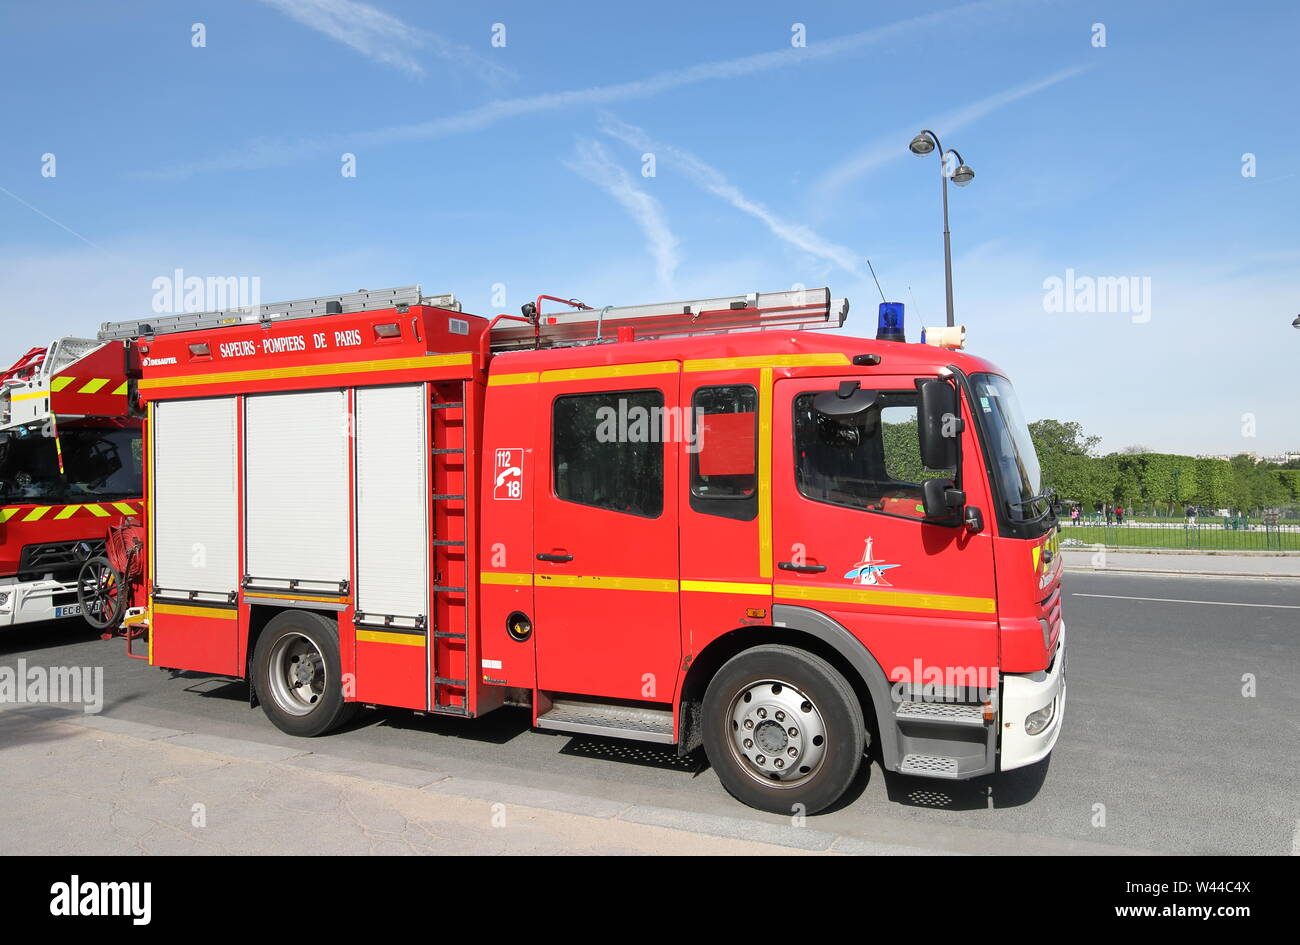 Fire engine vehicle in Paris France Stock Photo